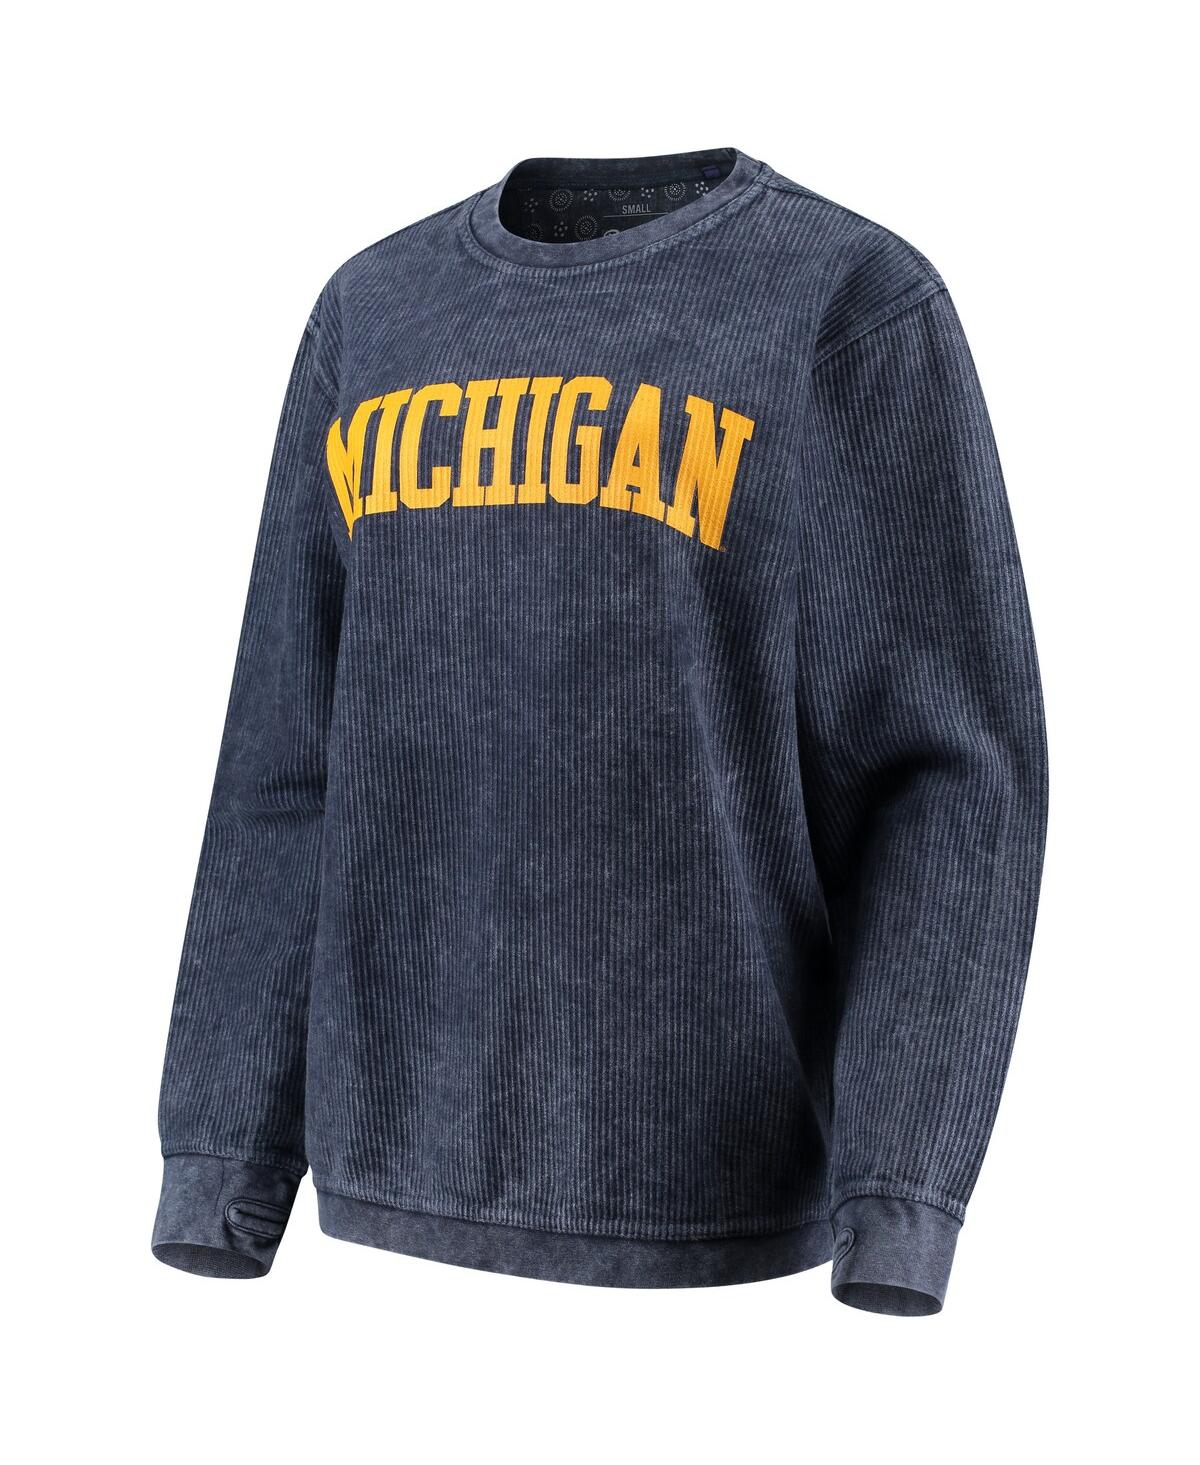 Shop Pressbox Women's  Navy Distressed Michigan Wolverines Comfy Cord Vintage-like Wash Basic Arch Pullove